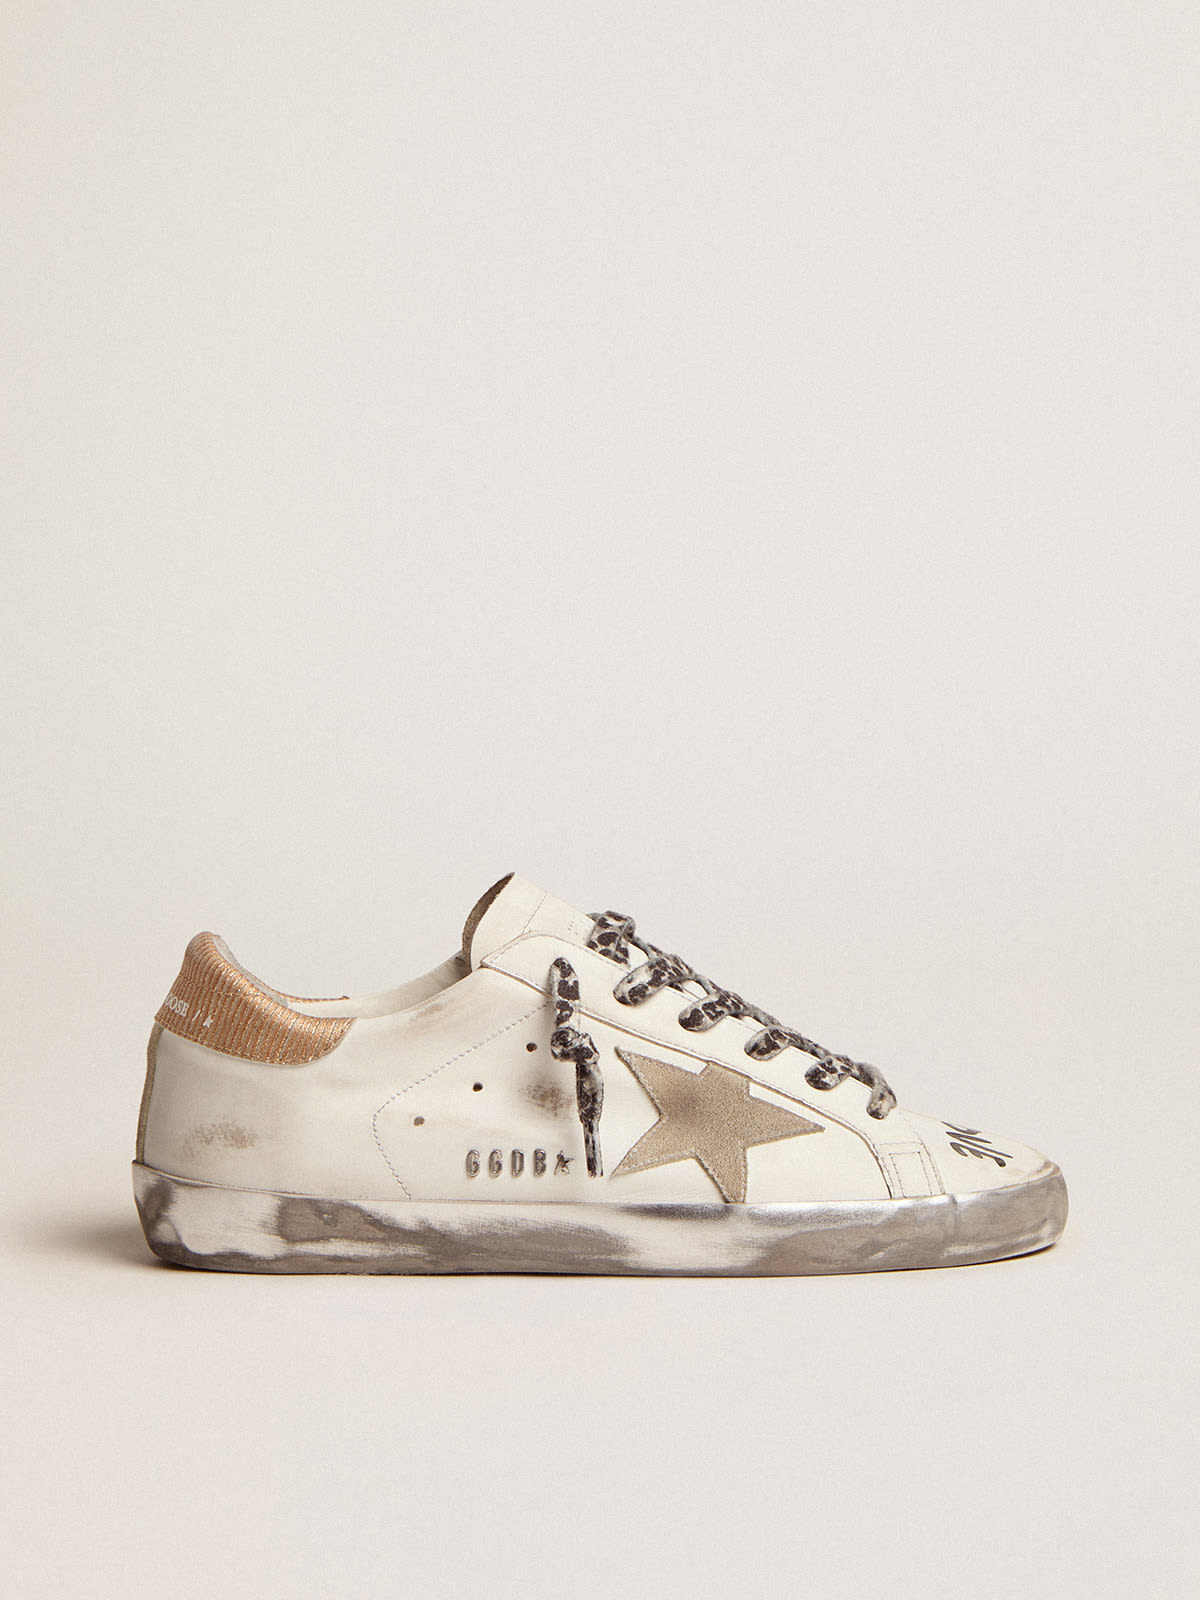 Golden Goose - Super-Star sneakers in white leather with ice-gray suede star and contrasting black lettering in 